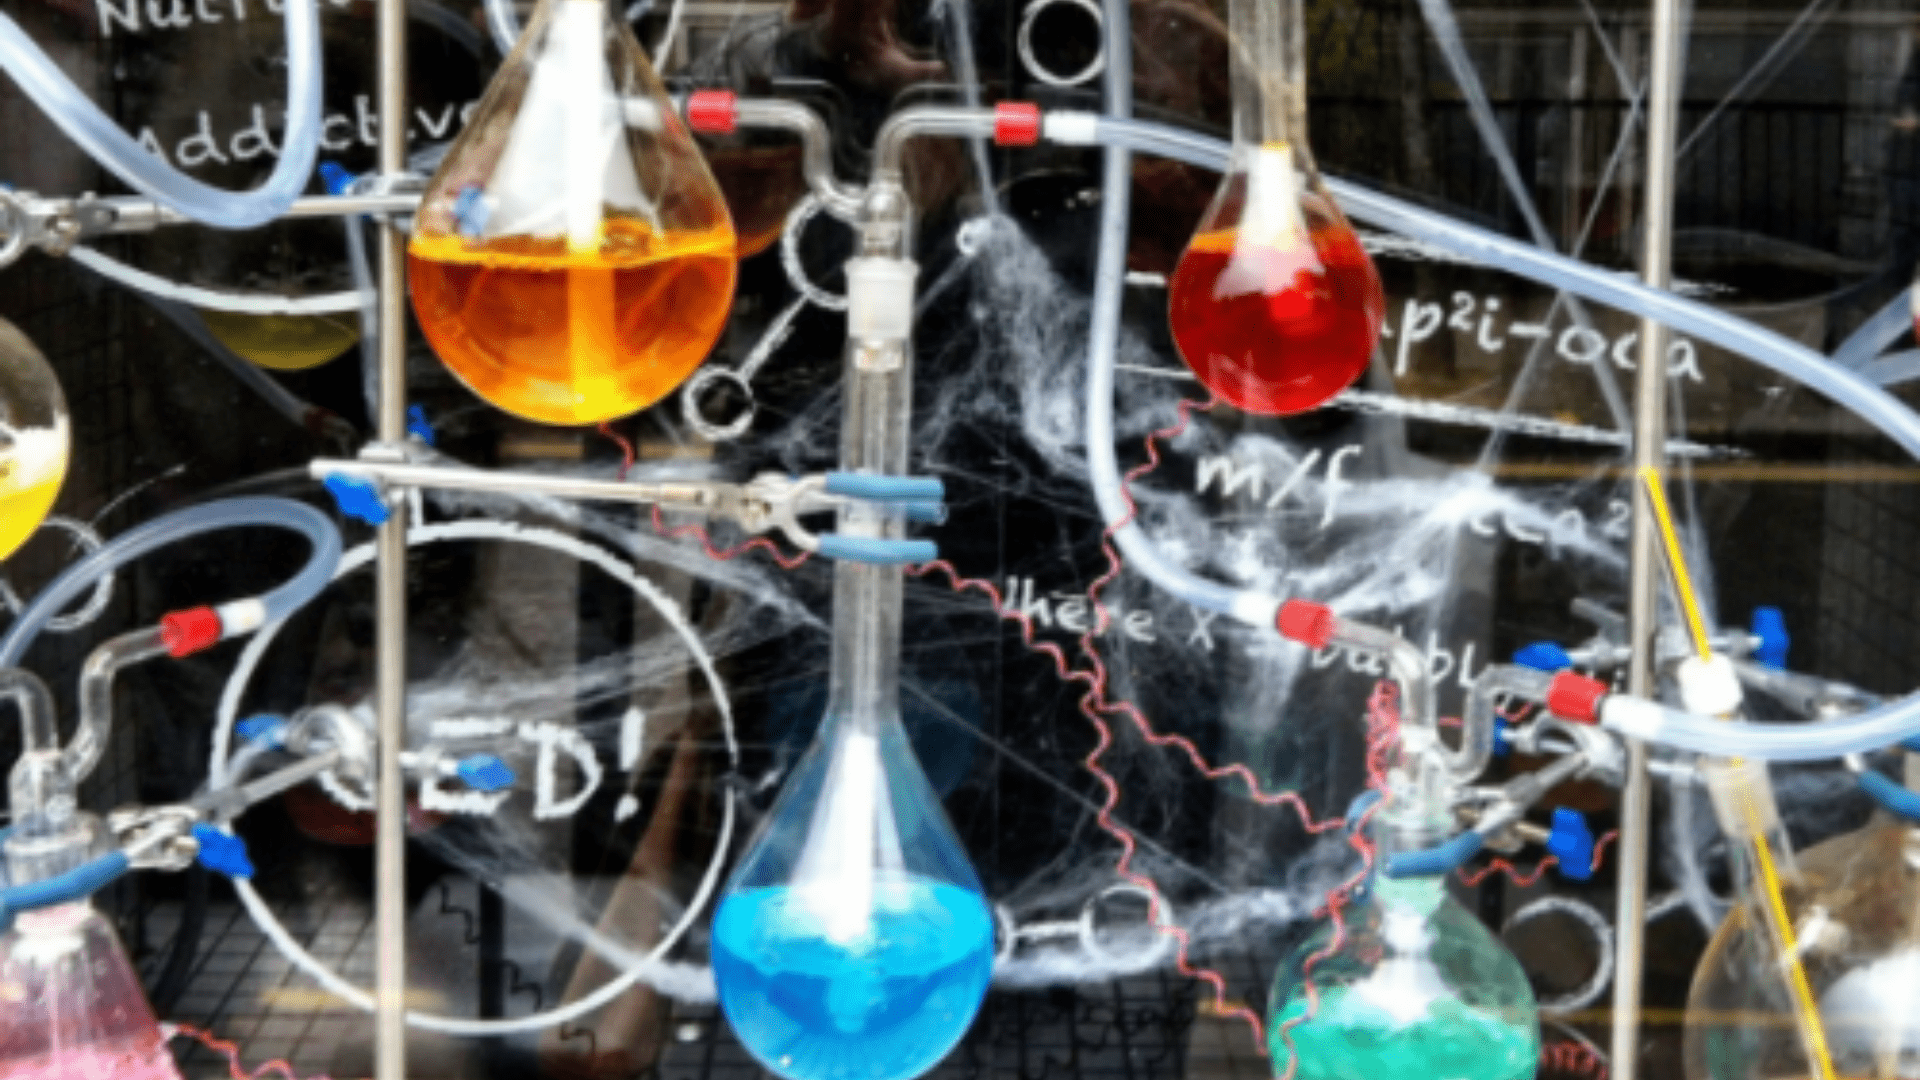 Making magic happen: how to build client-agency chemistry in PR